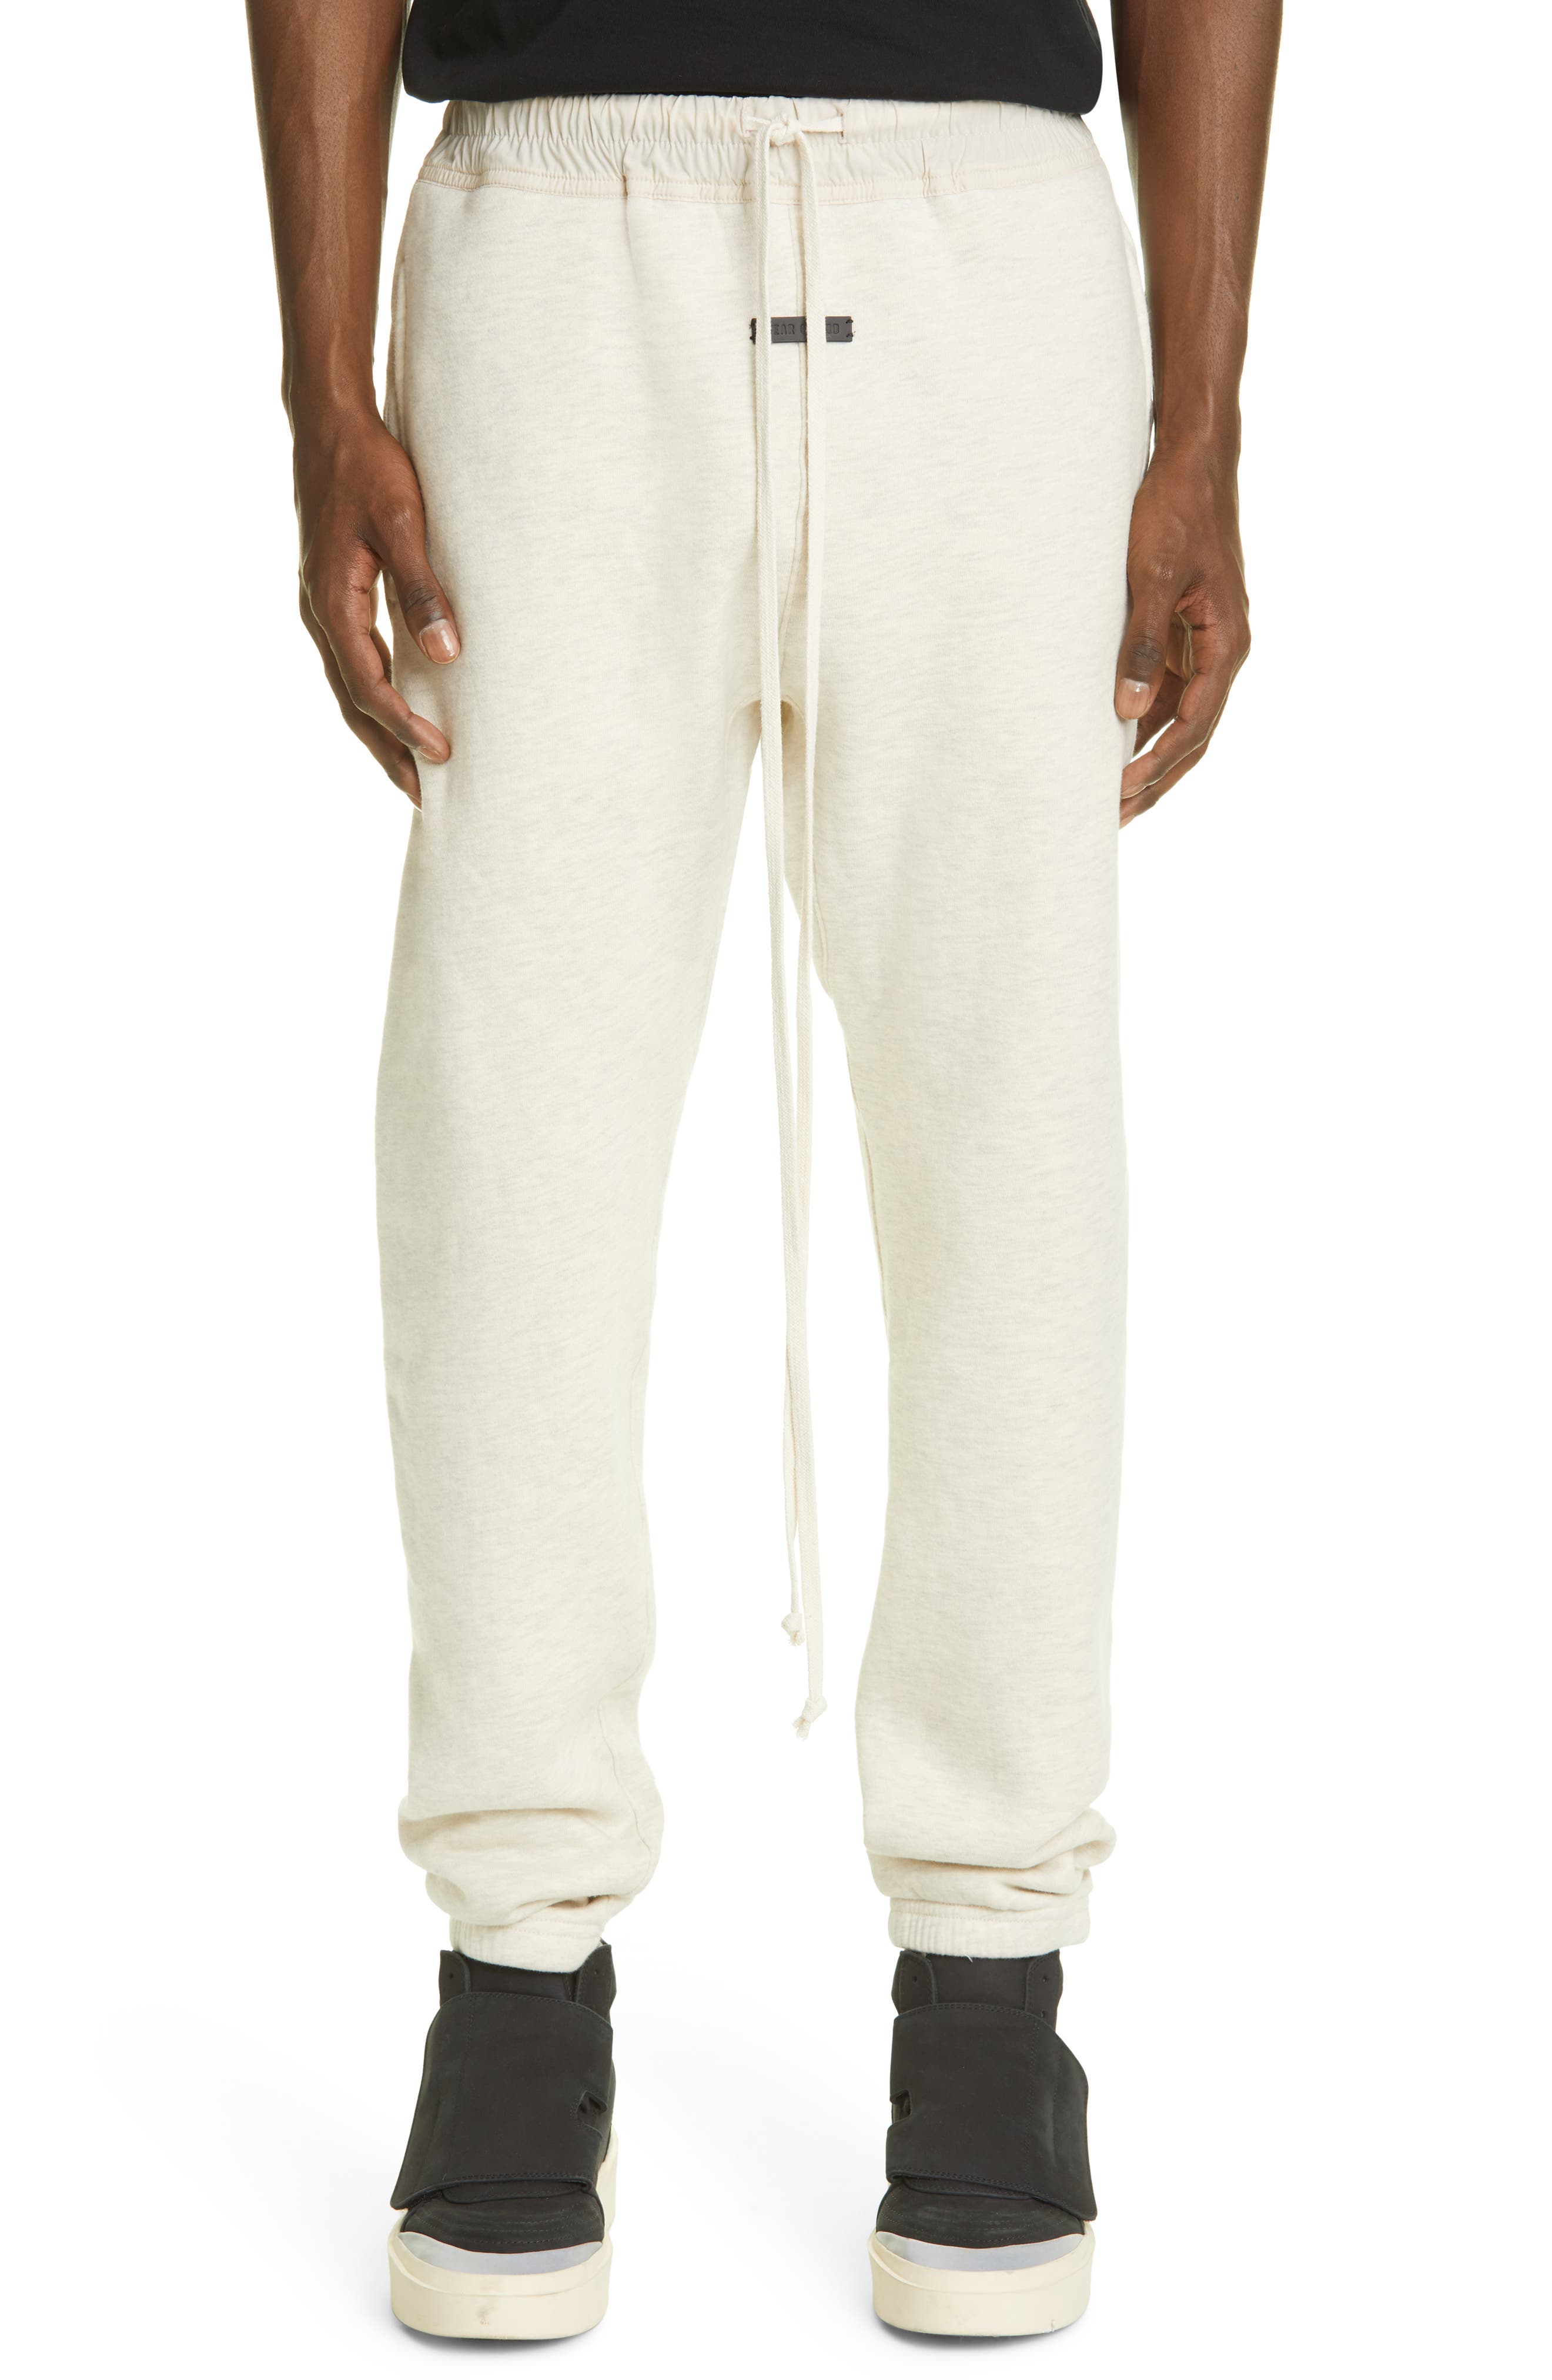 Fear of God The Vintage Sweatpants in Cream Heather at Nordstrom, Size X-Large